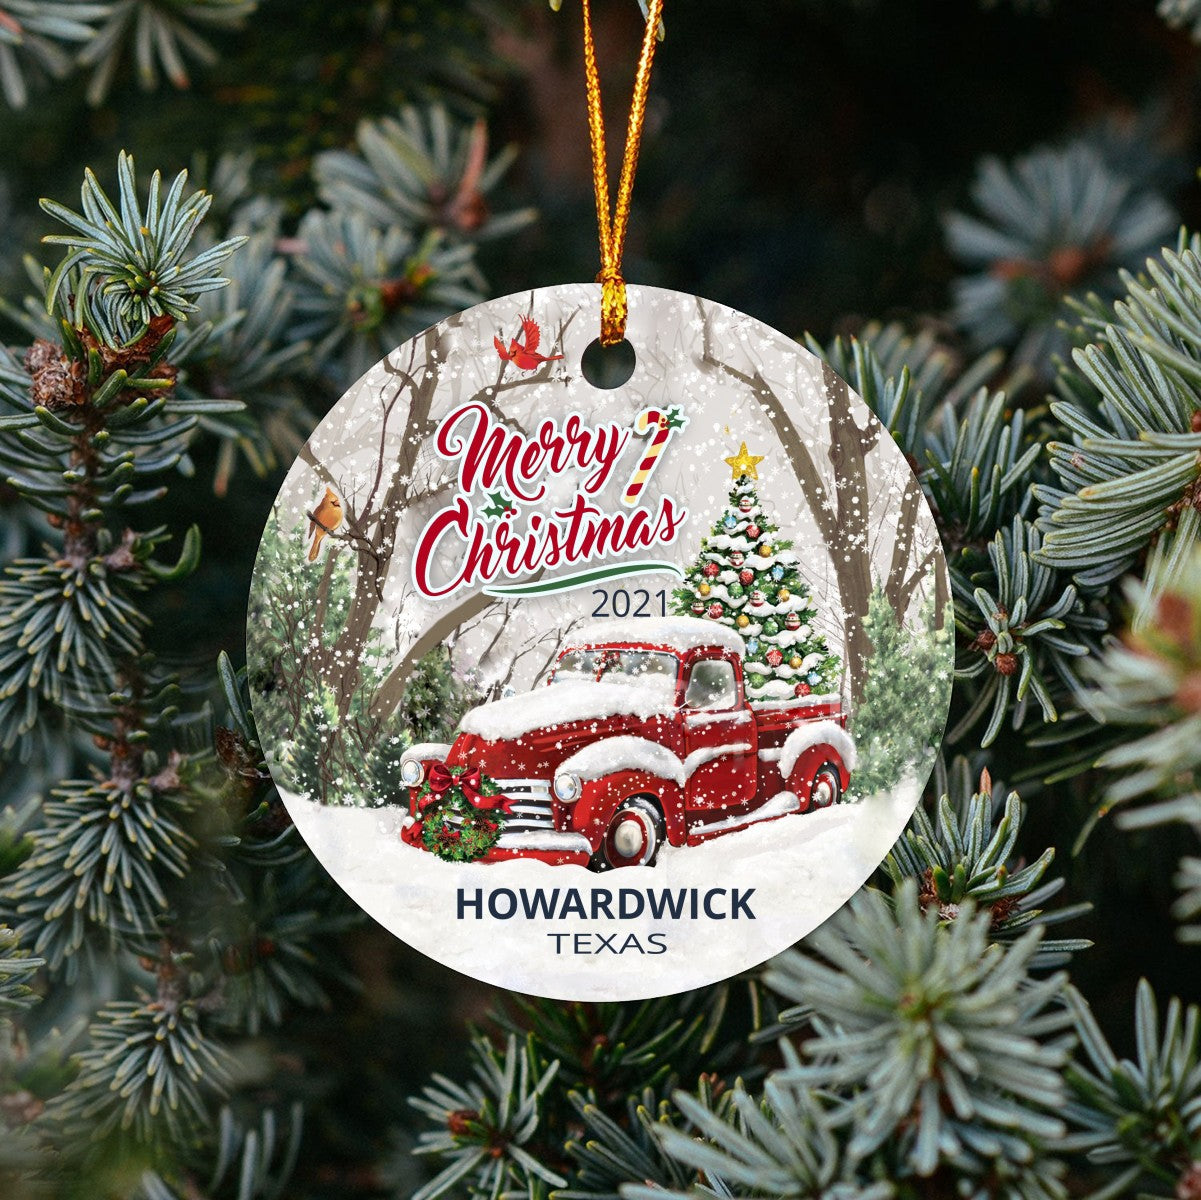 Christmas Tree Ornaments Howardwick - Ornament With Name City, State Howardwick Texas TX Ornament - Red Truck Xmas Ornaments 3'' Plastic Gift For Family, Friend And Housewarming